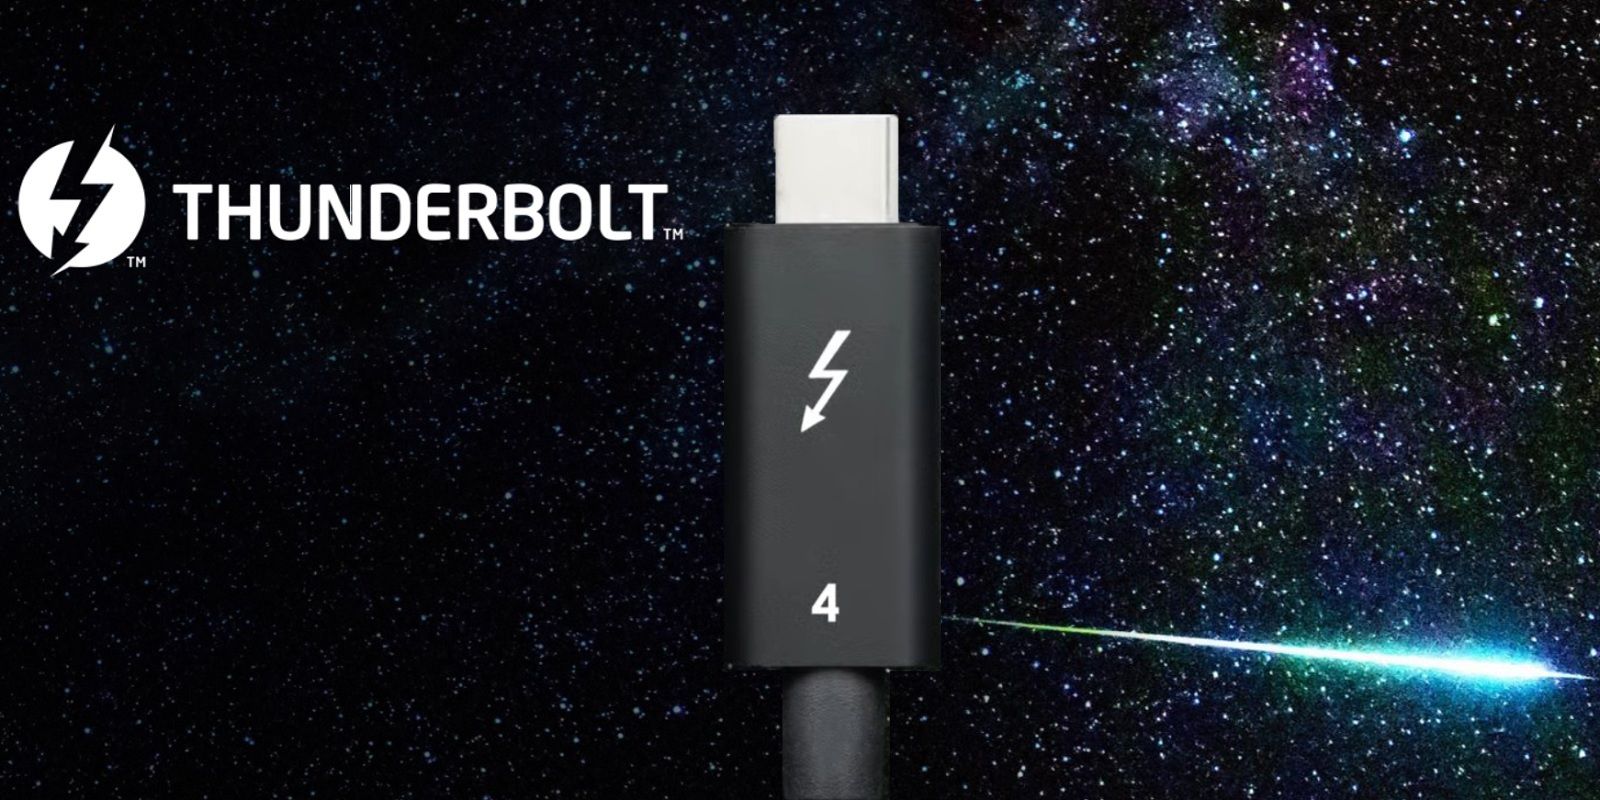 Thunderbolt 4: What's New With Intel's Latest Connection Standard